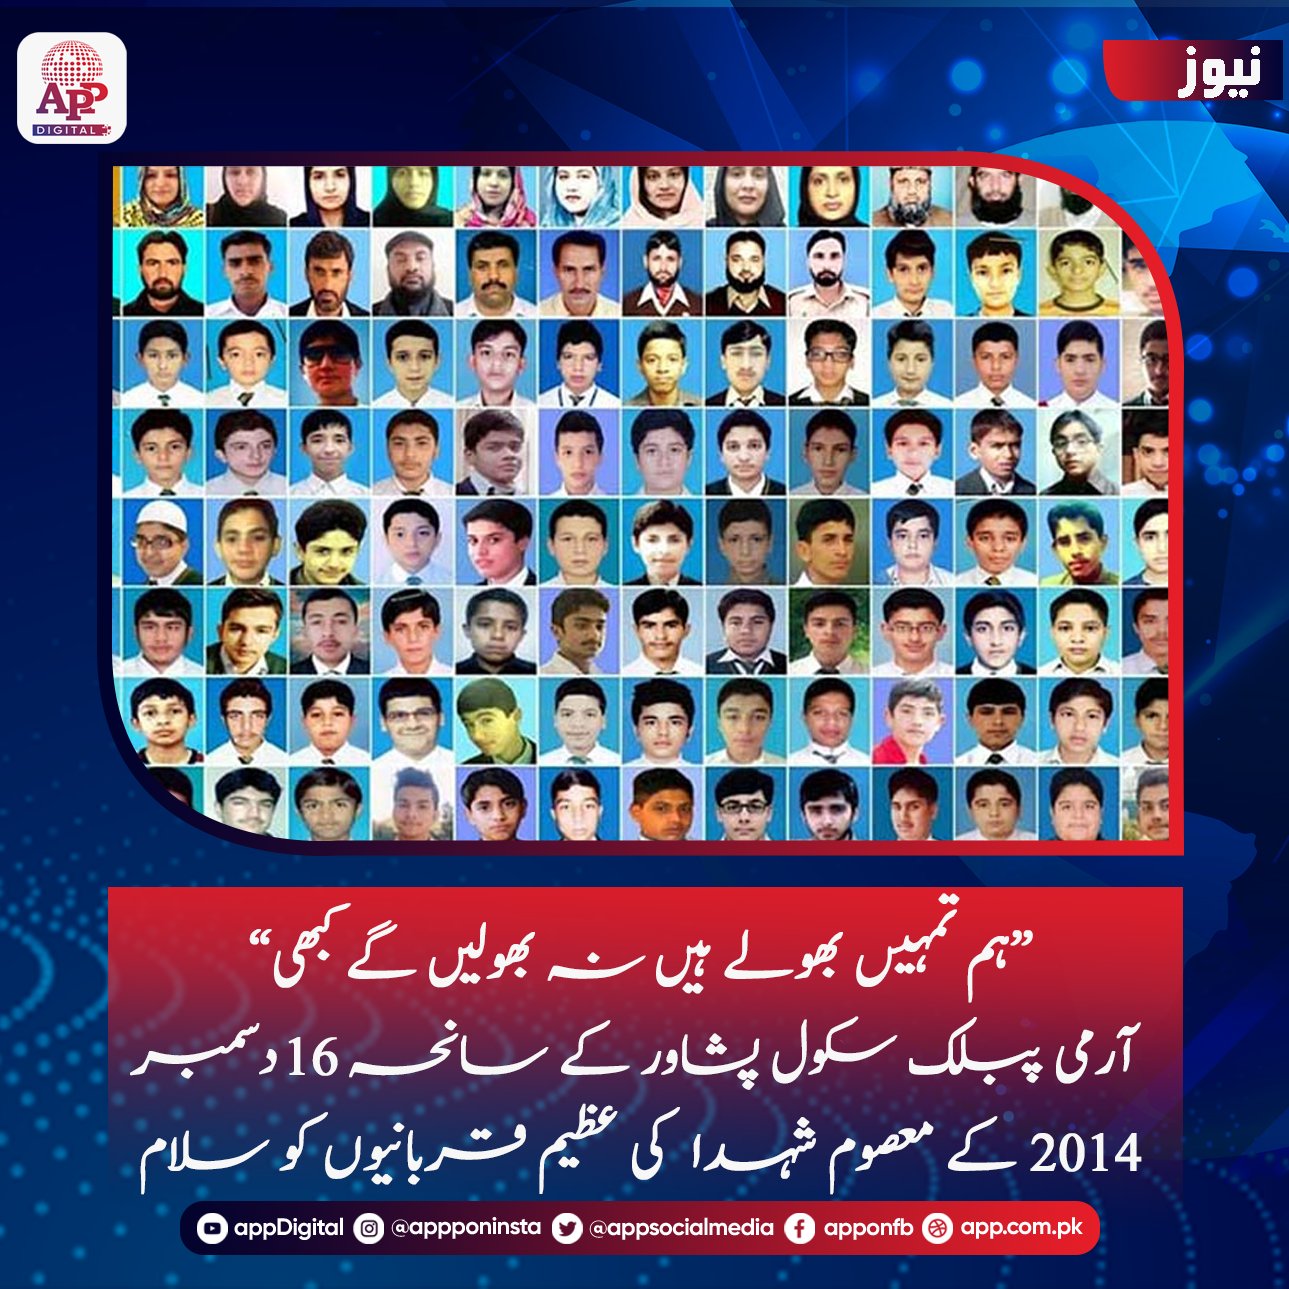 Blood of innocent martyrs of APS united nation against terrorism